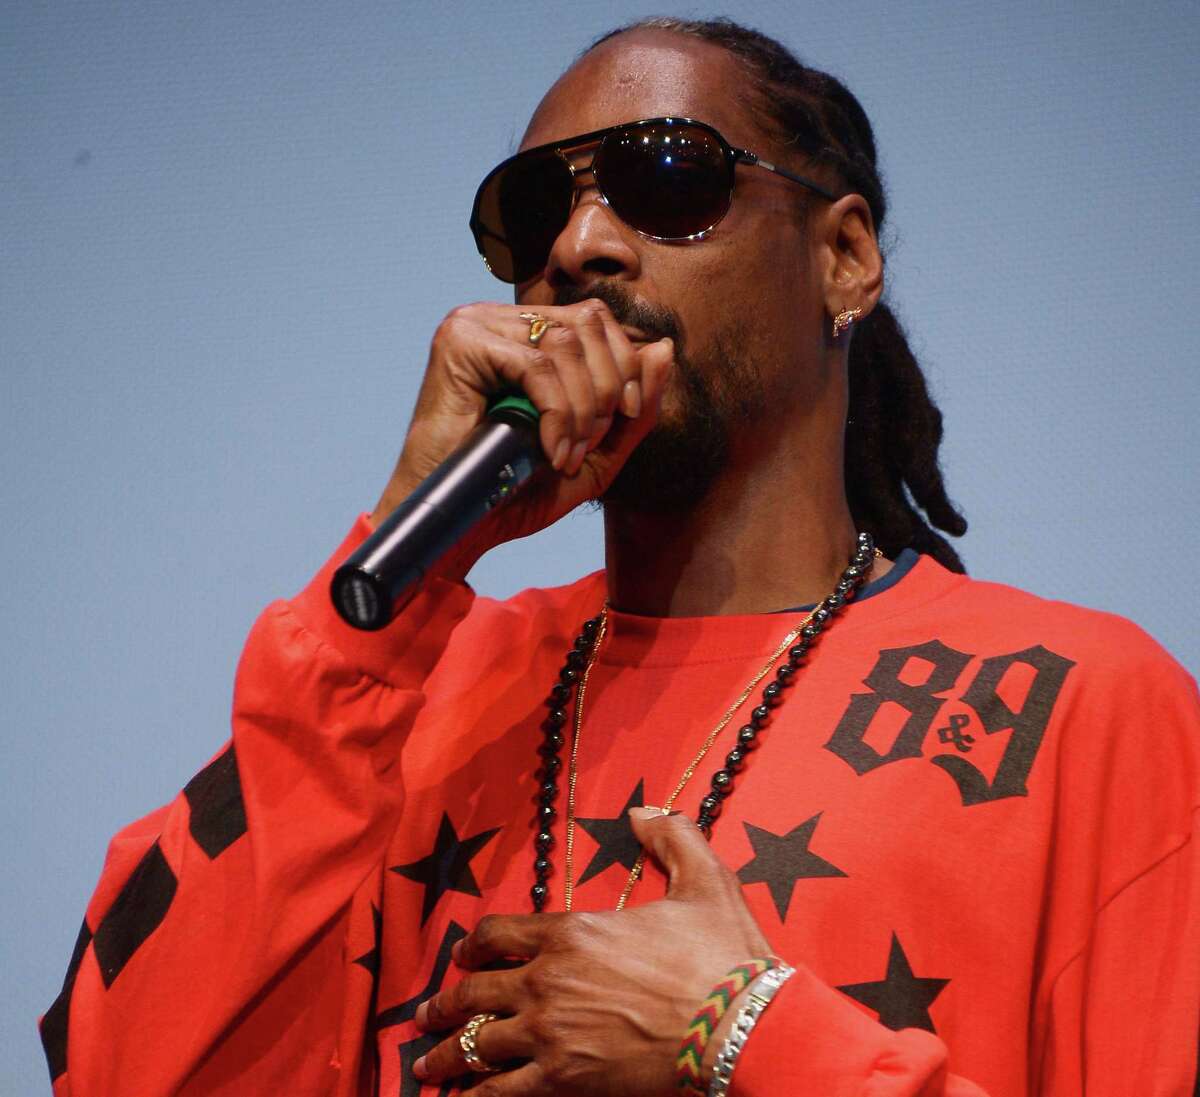 Rapper Snoop Dogg was one of the stars of South by Southwest's final weekend.